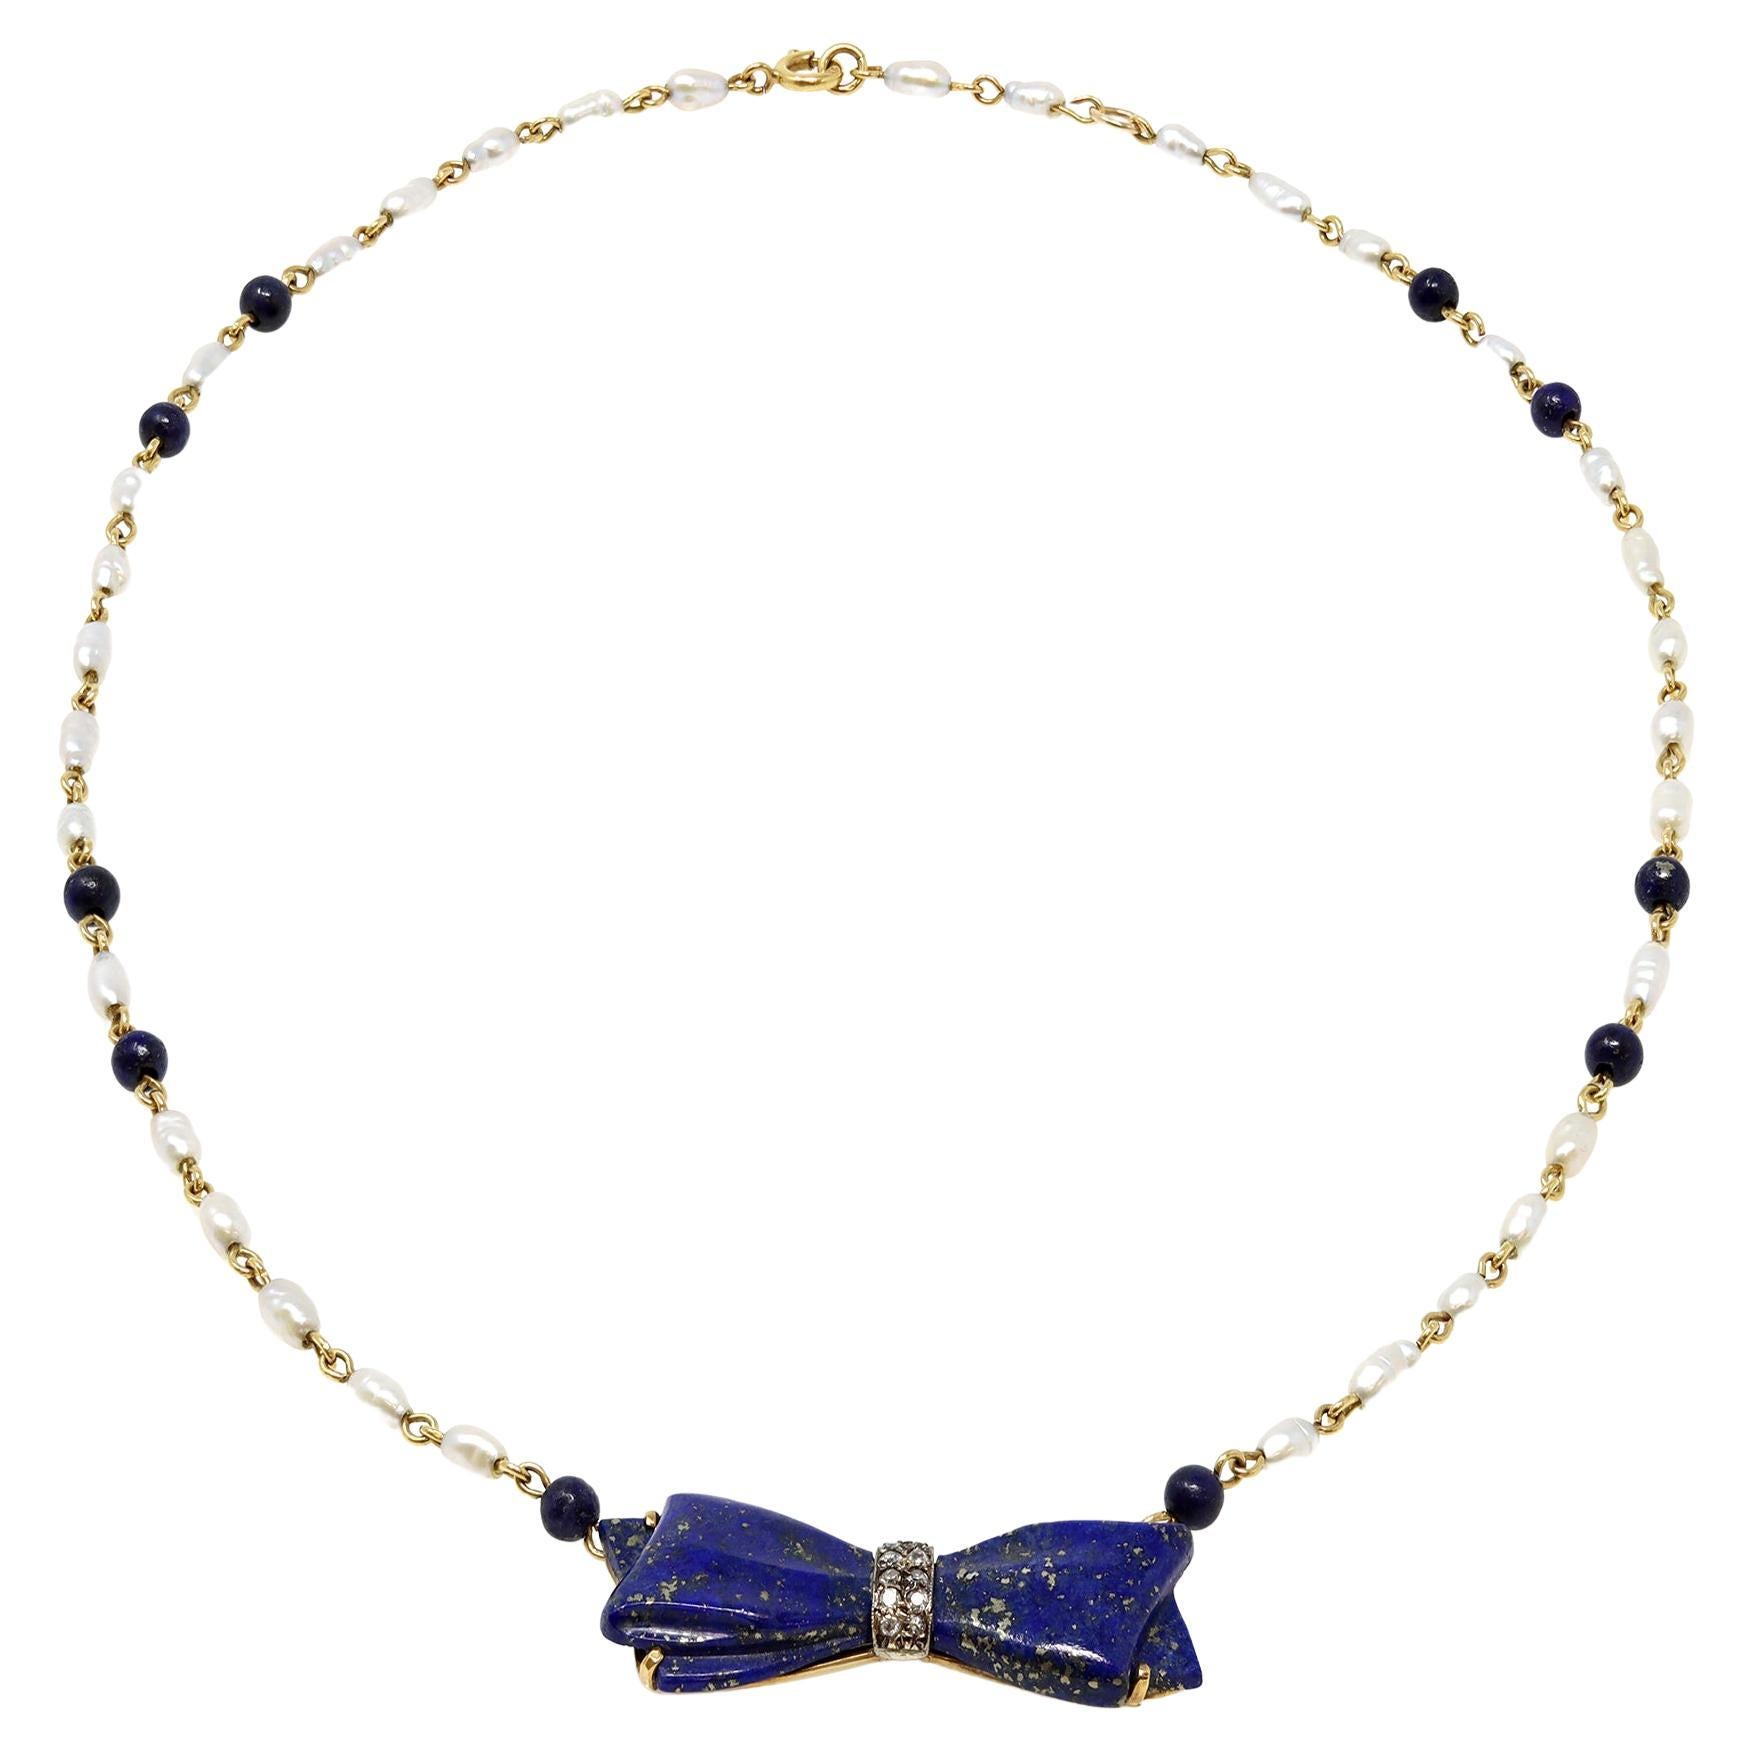 Antique Lapis Lazuli Bow Necklace with Pearls in Yellow Gold